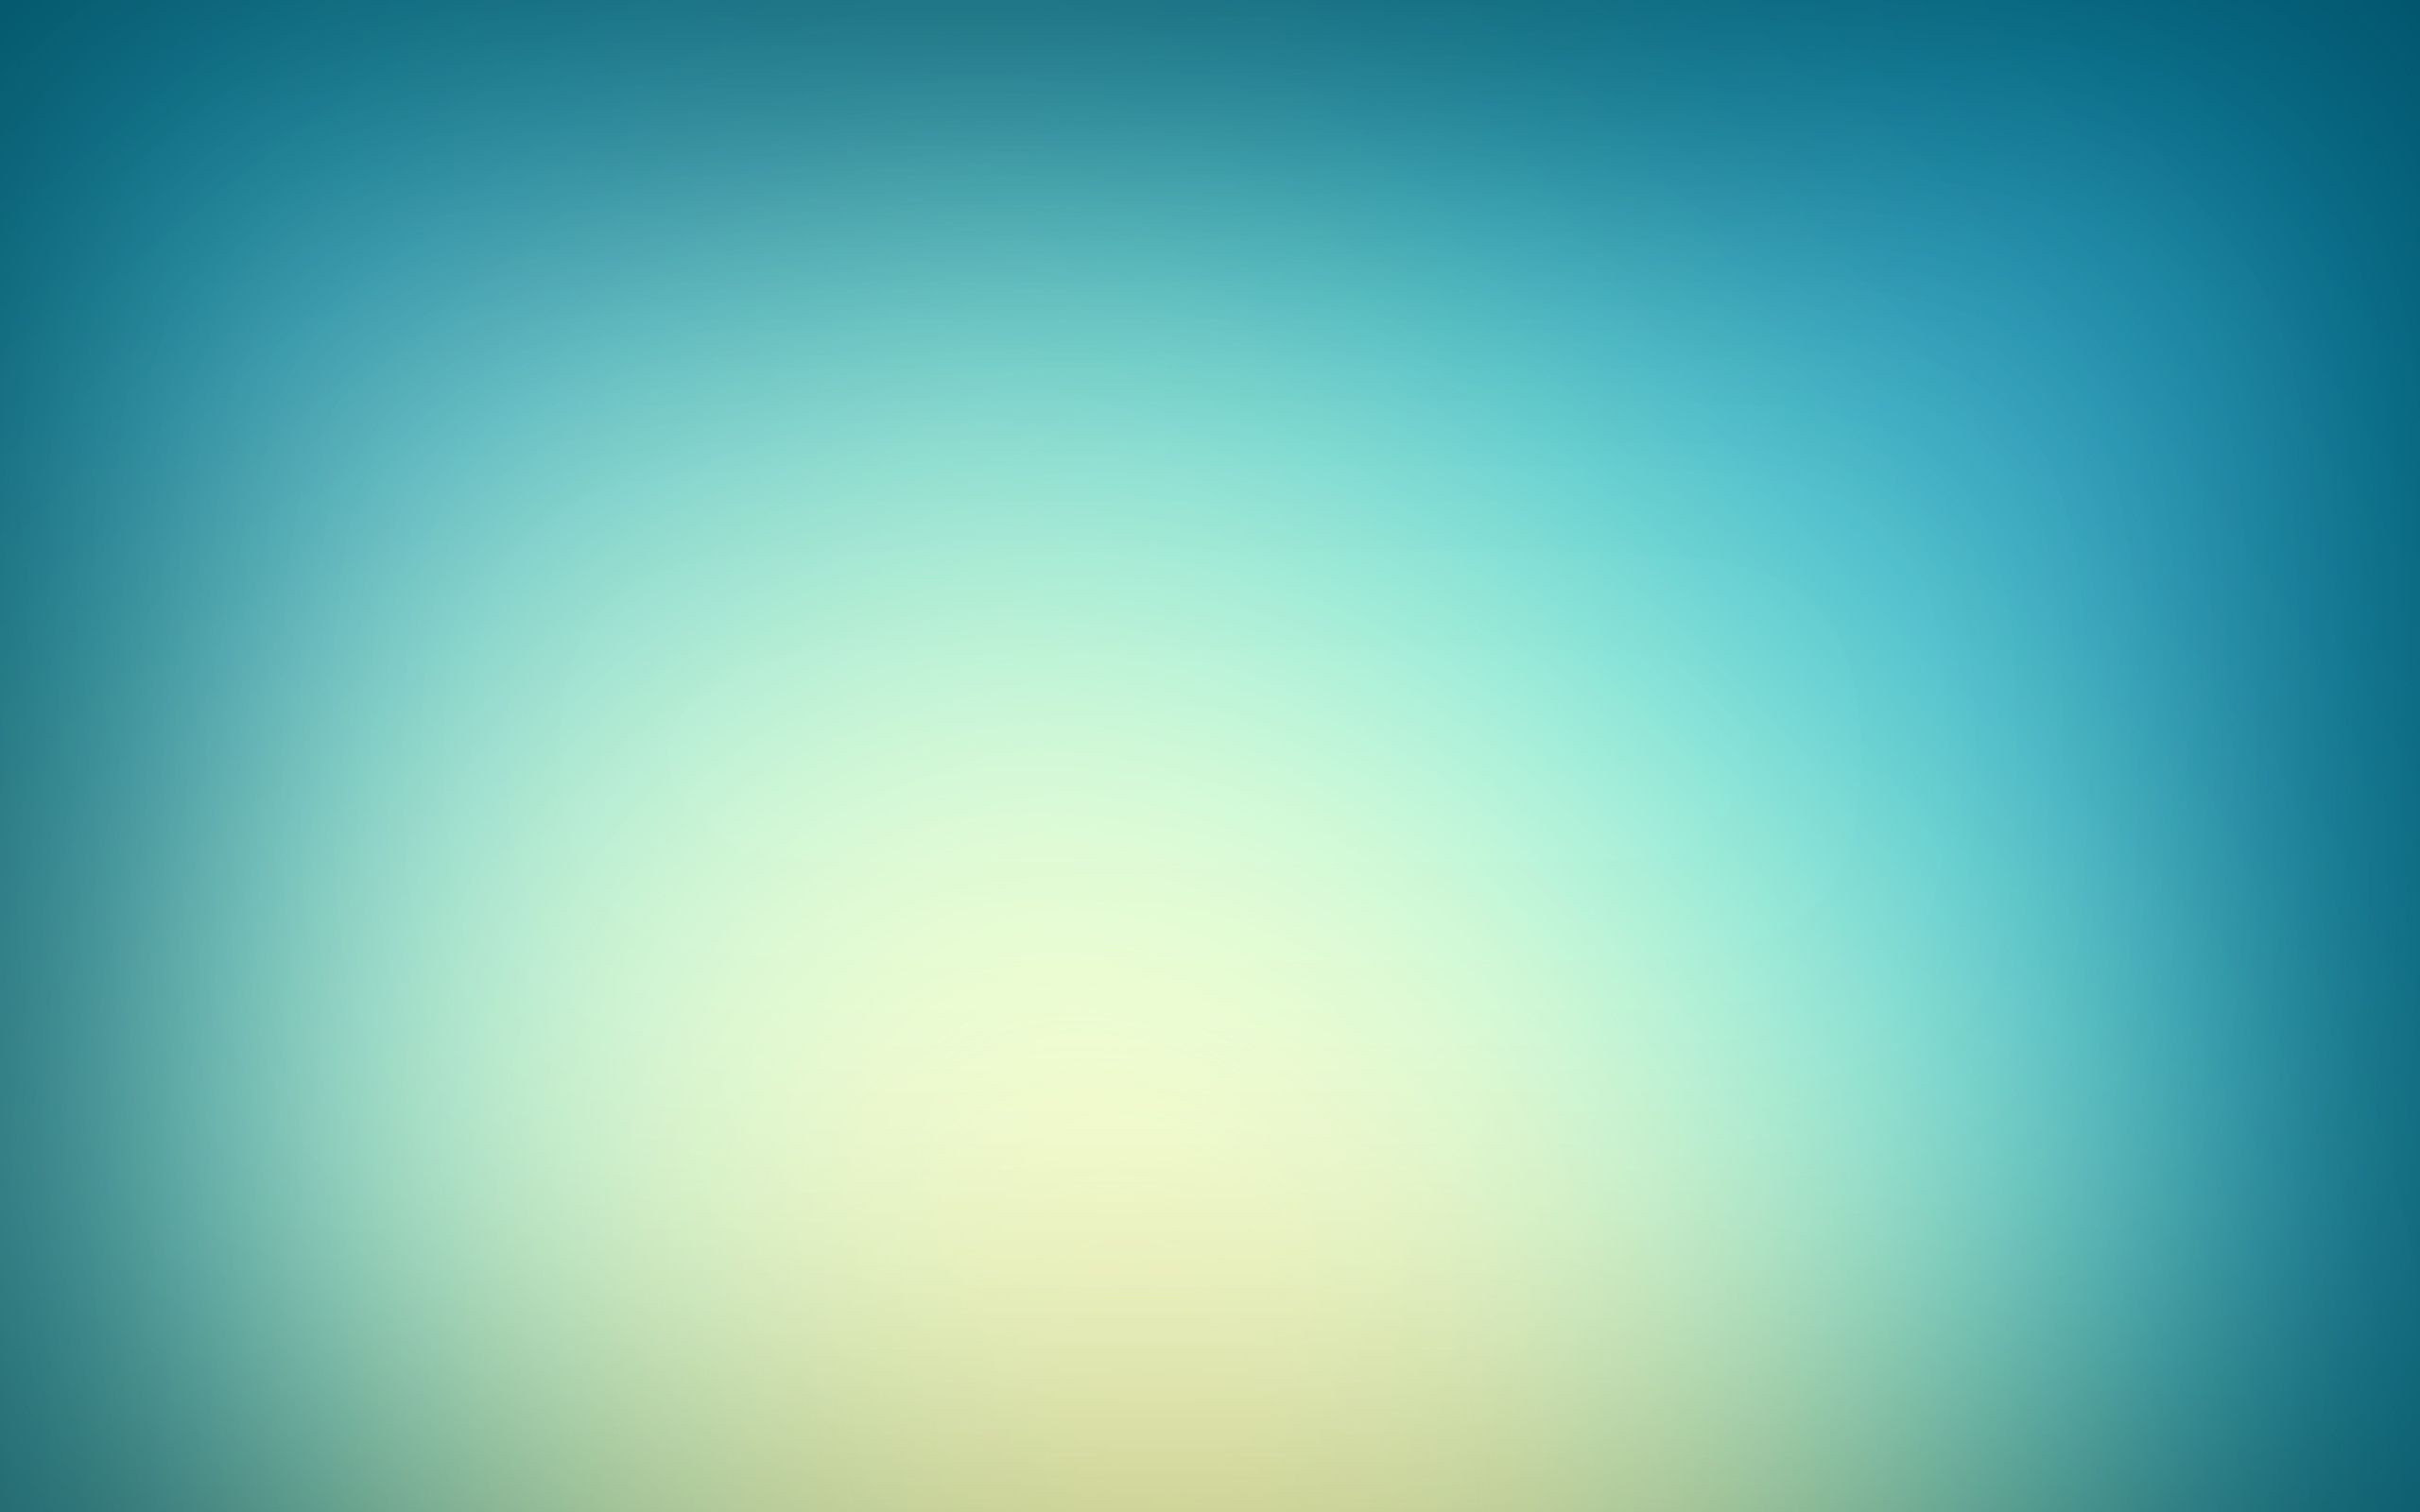 Blue and Pink Hair Gradient Backgrounds - wide 4